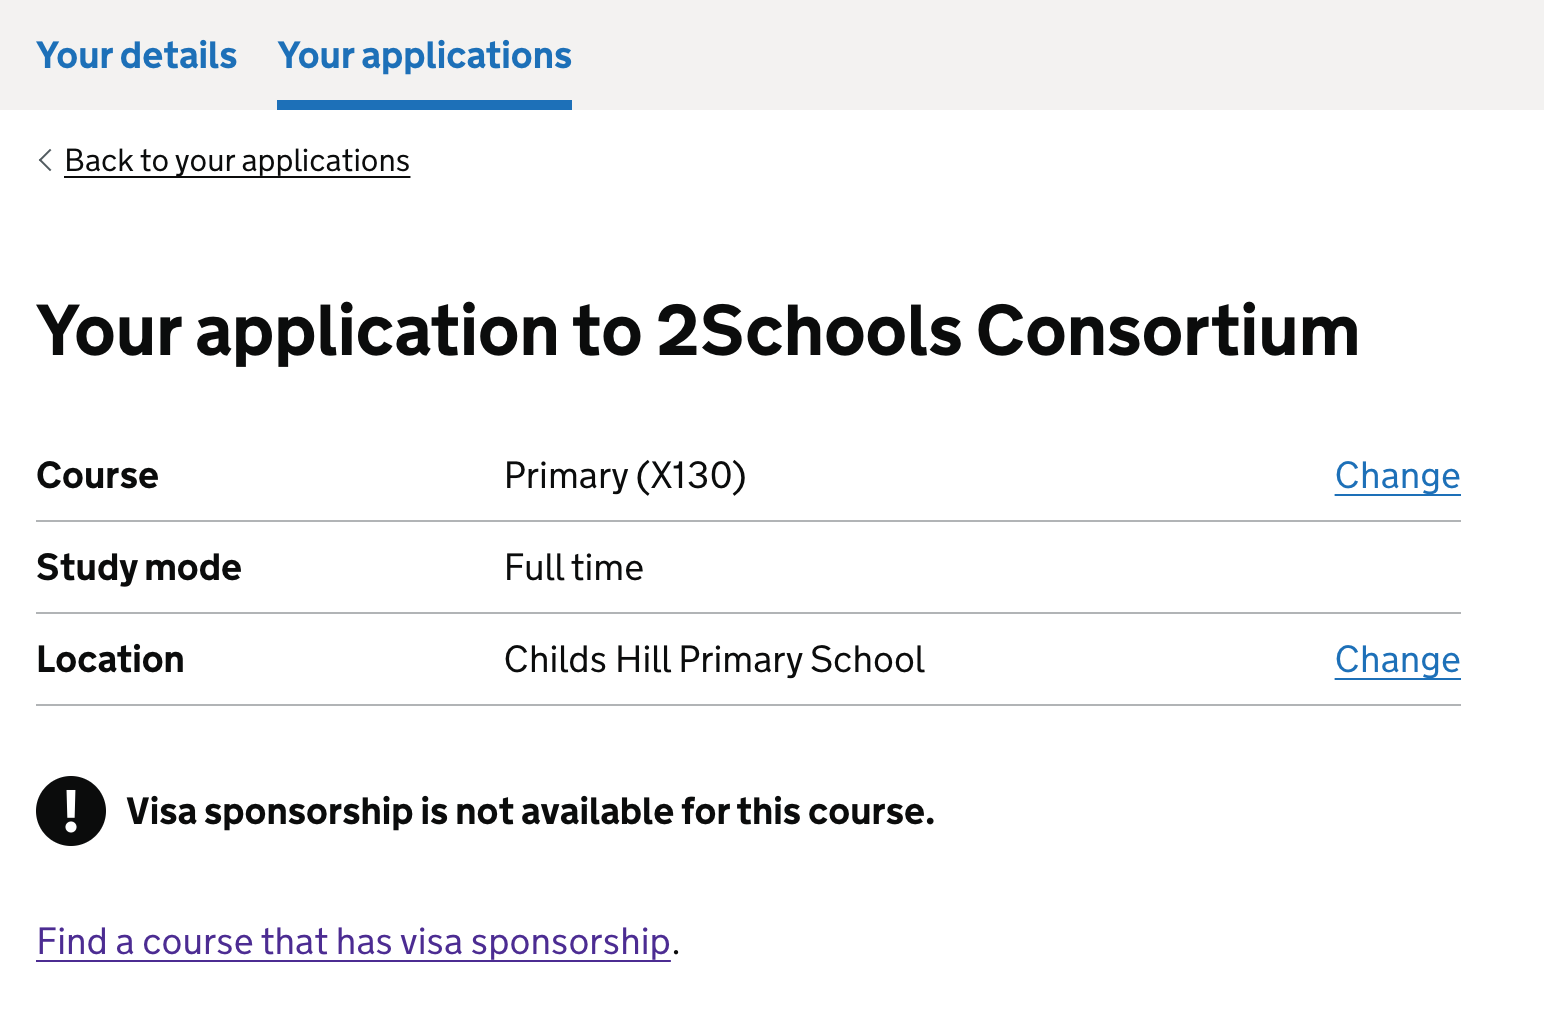 Screenshot of the summary of the provider and course a candidate is applying to in a summary list. Below this is content telling the candidate they cannot submit their application because the course does not sponsors visas.